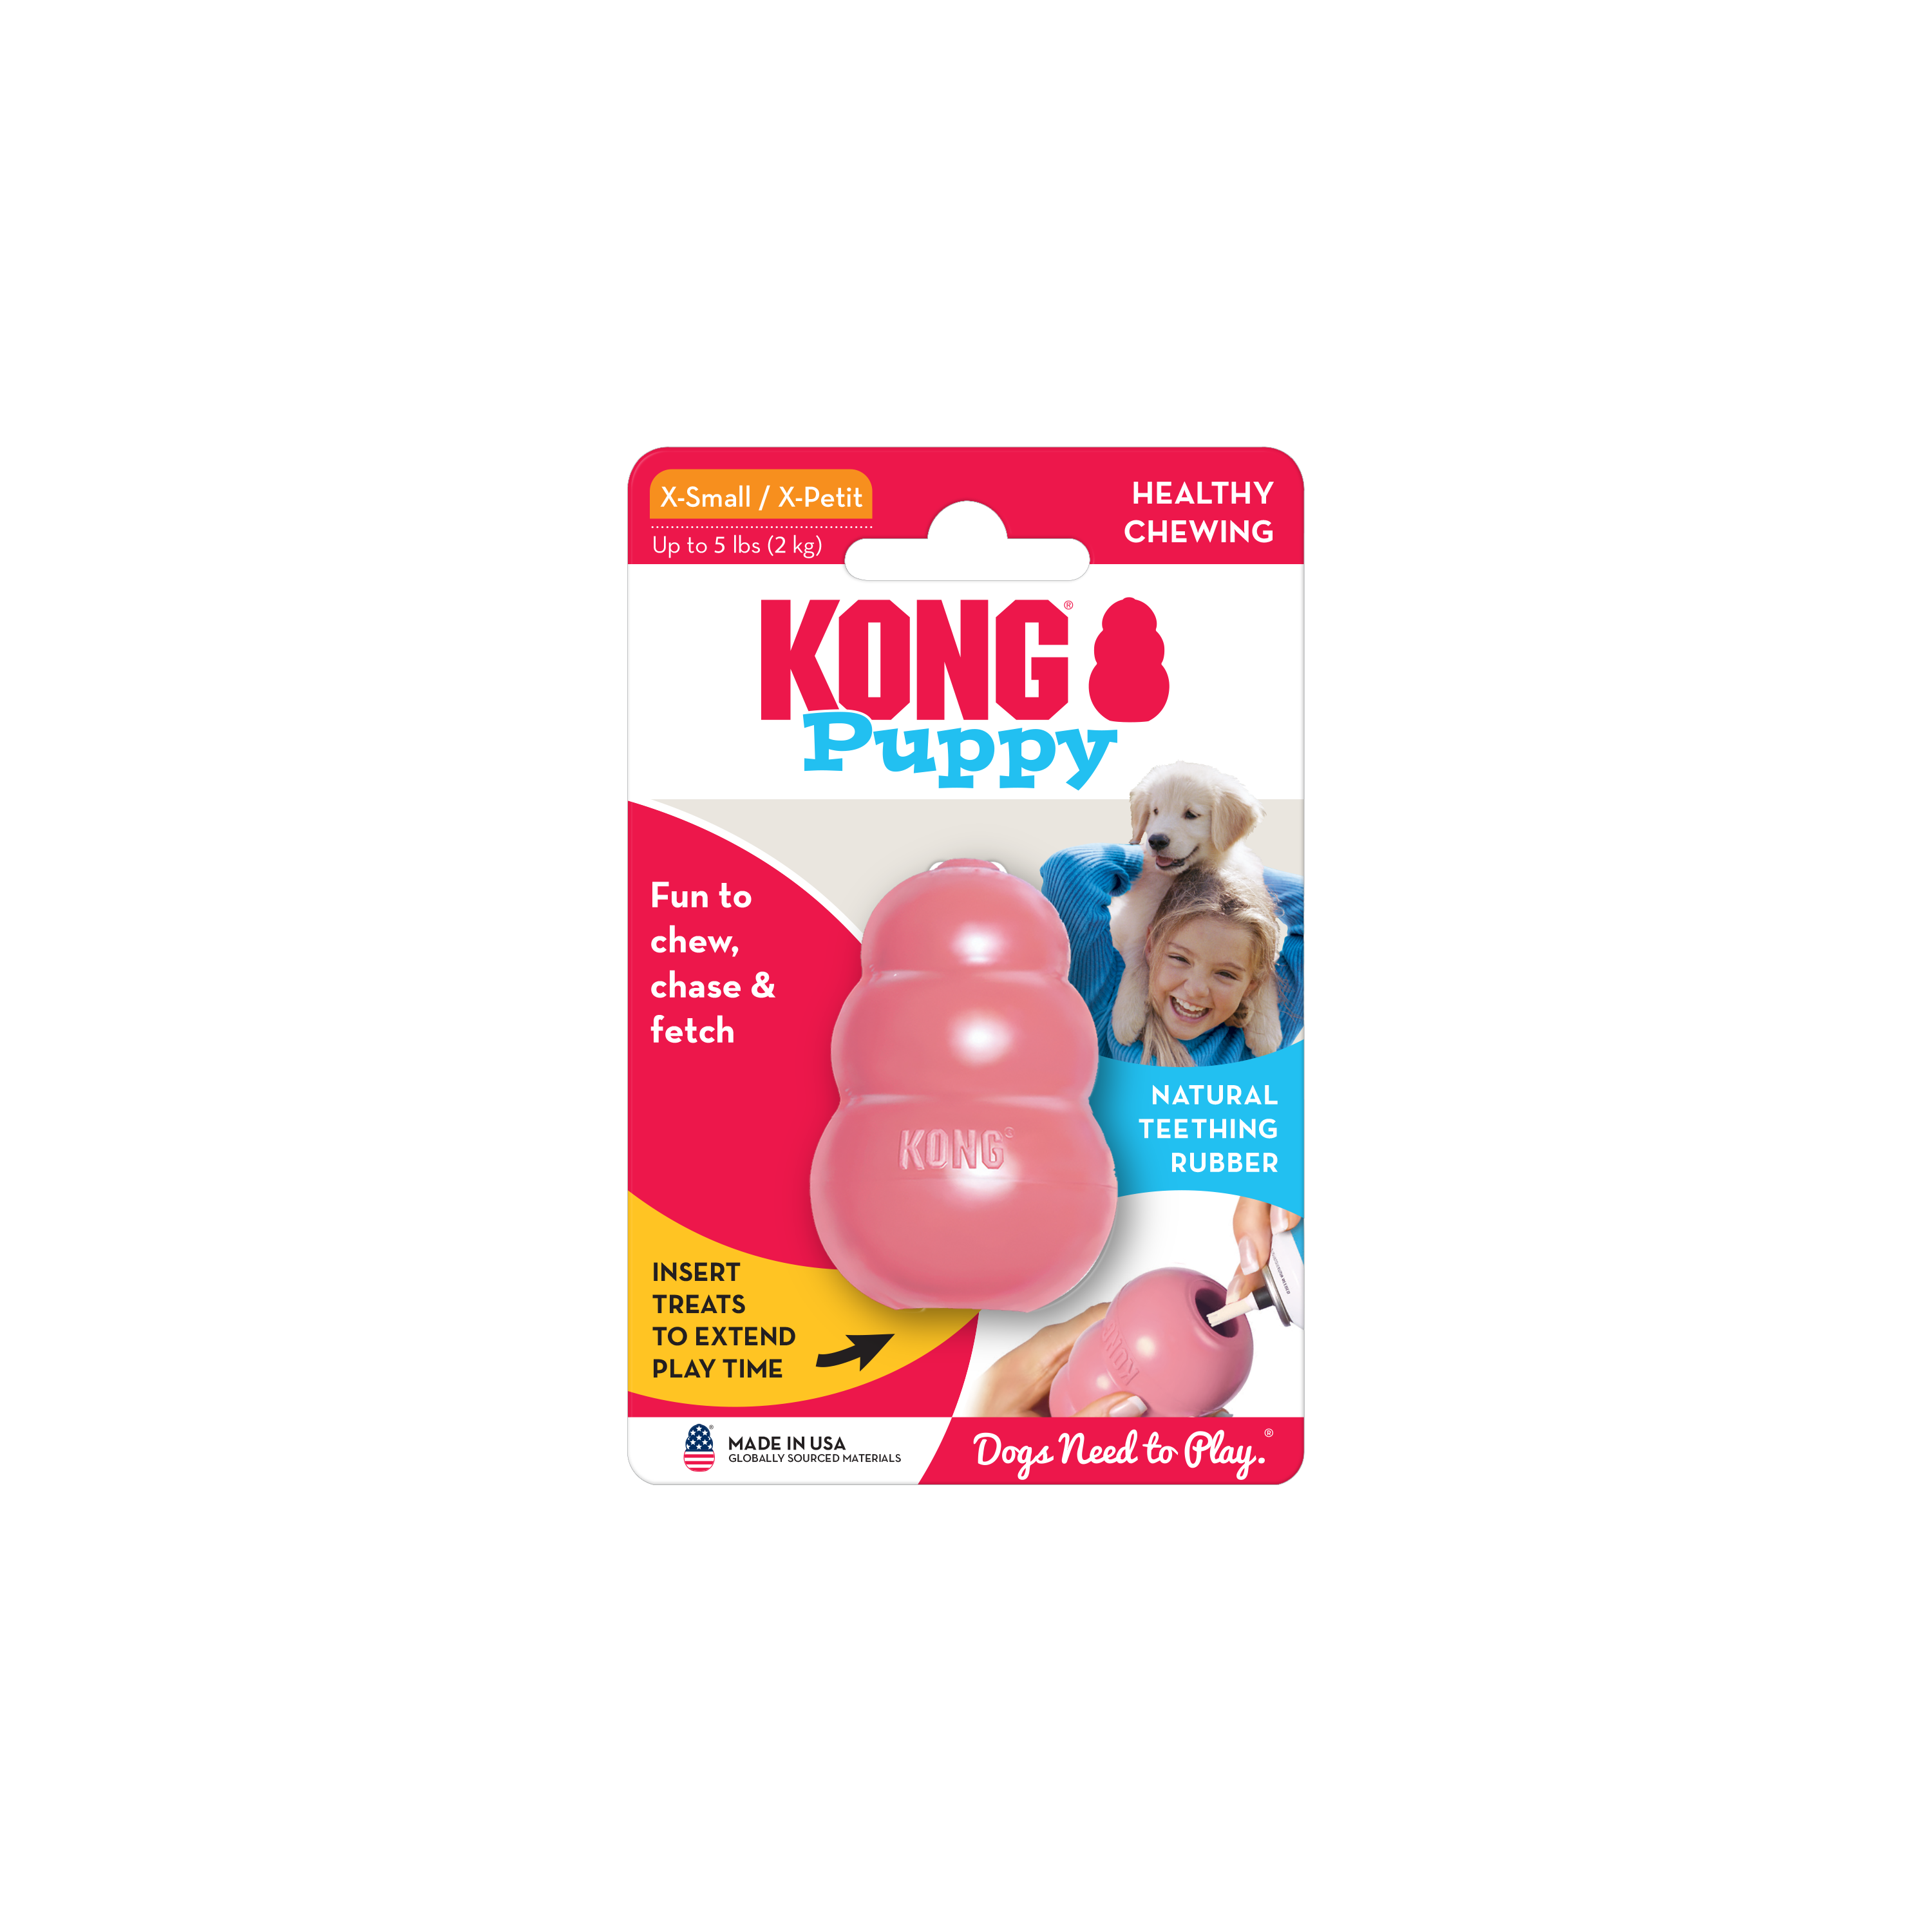 Imagen del producto KONG Puppy onpack